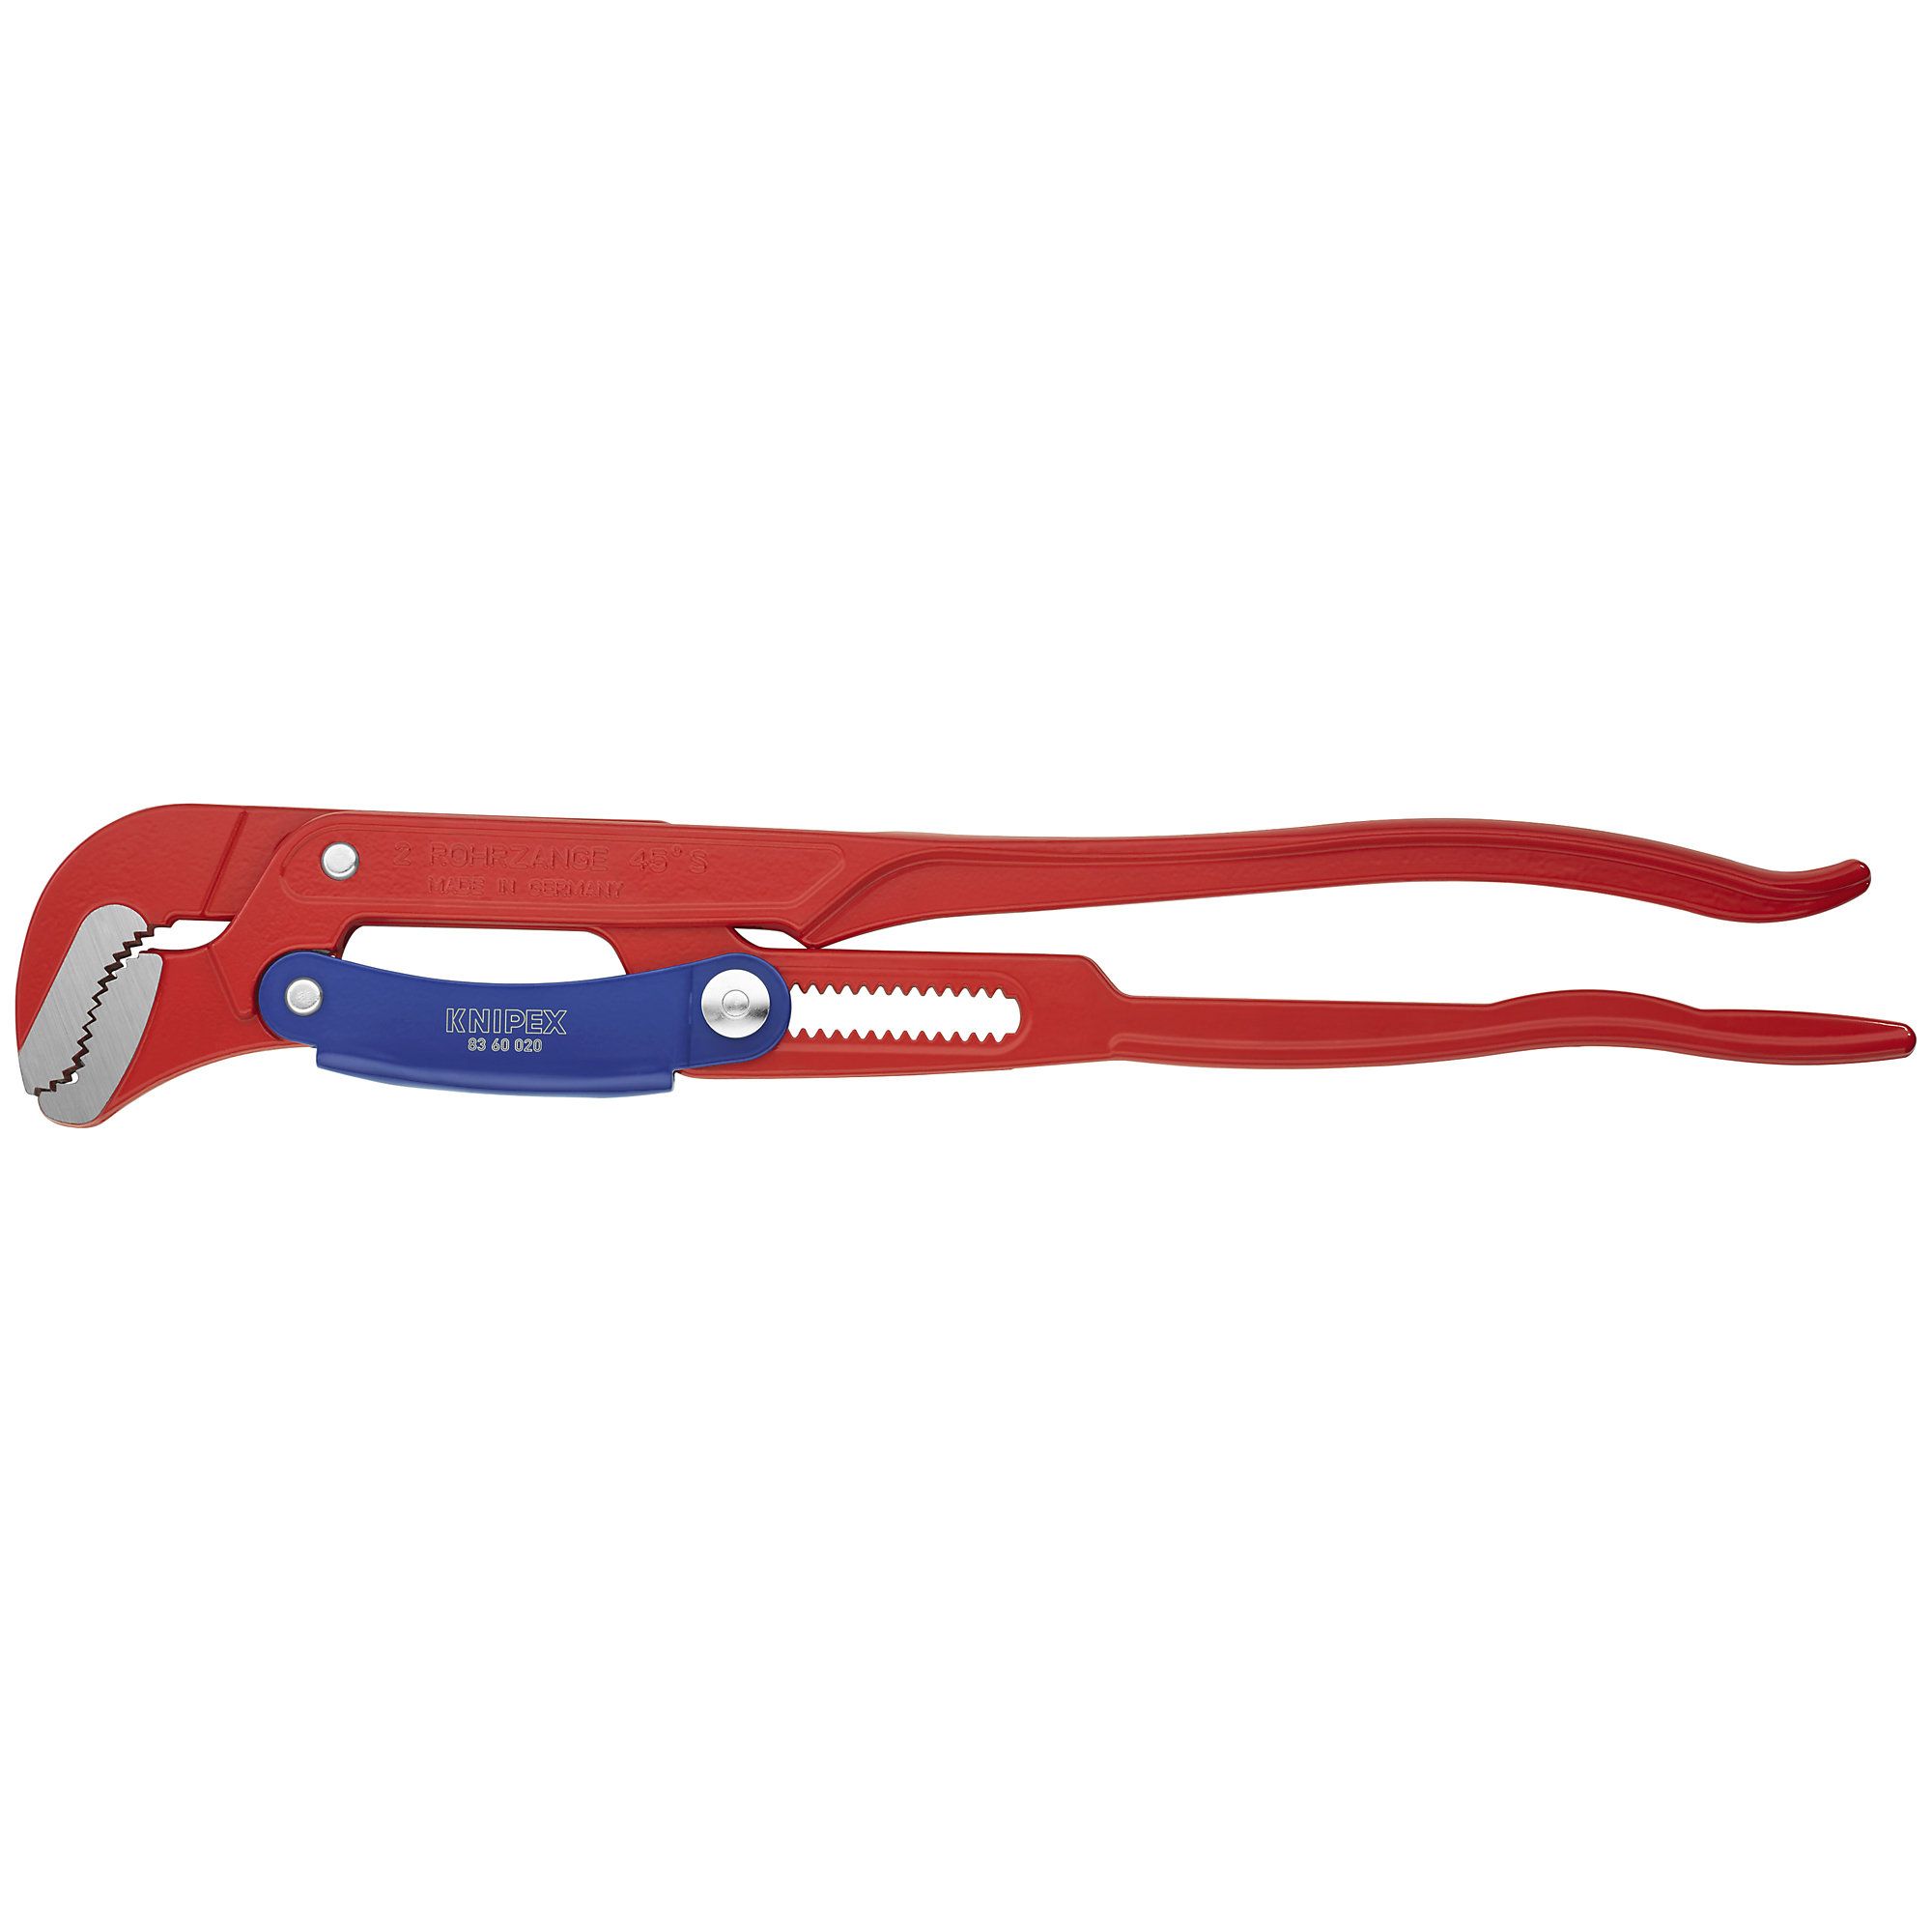 KNIPEX, Rapid Adjust Swedish Pipe Wrench-S-Type, 22Inch, Pieces (qty.) 1 Material Steel, Jaw Capacity 2.75 in, Model 83 60 020